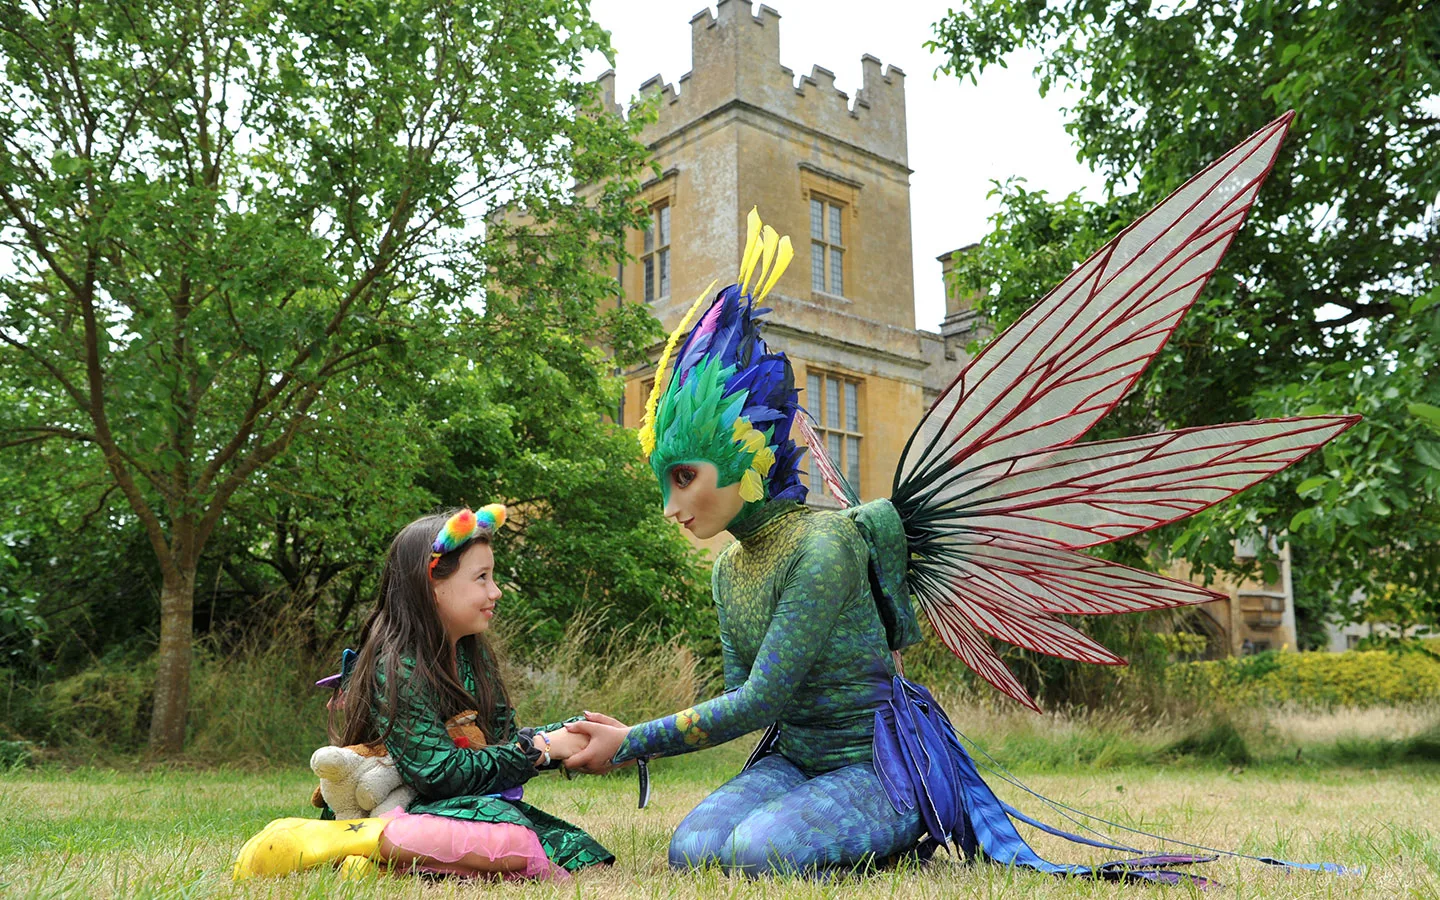 Fantasy Forest festival in the Cotswolds